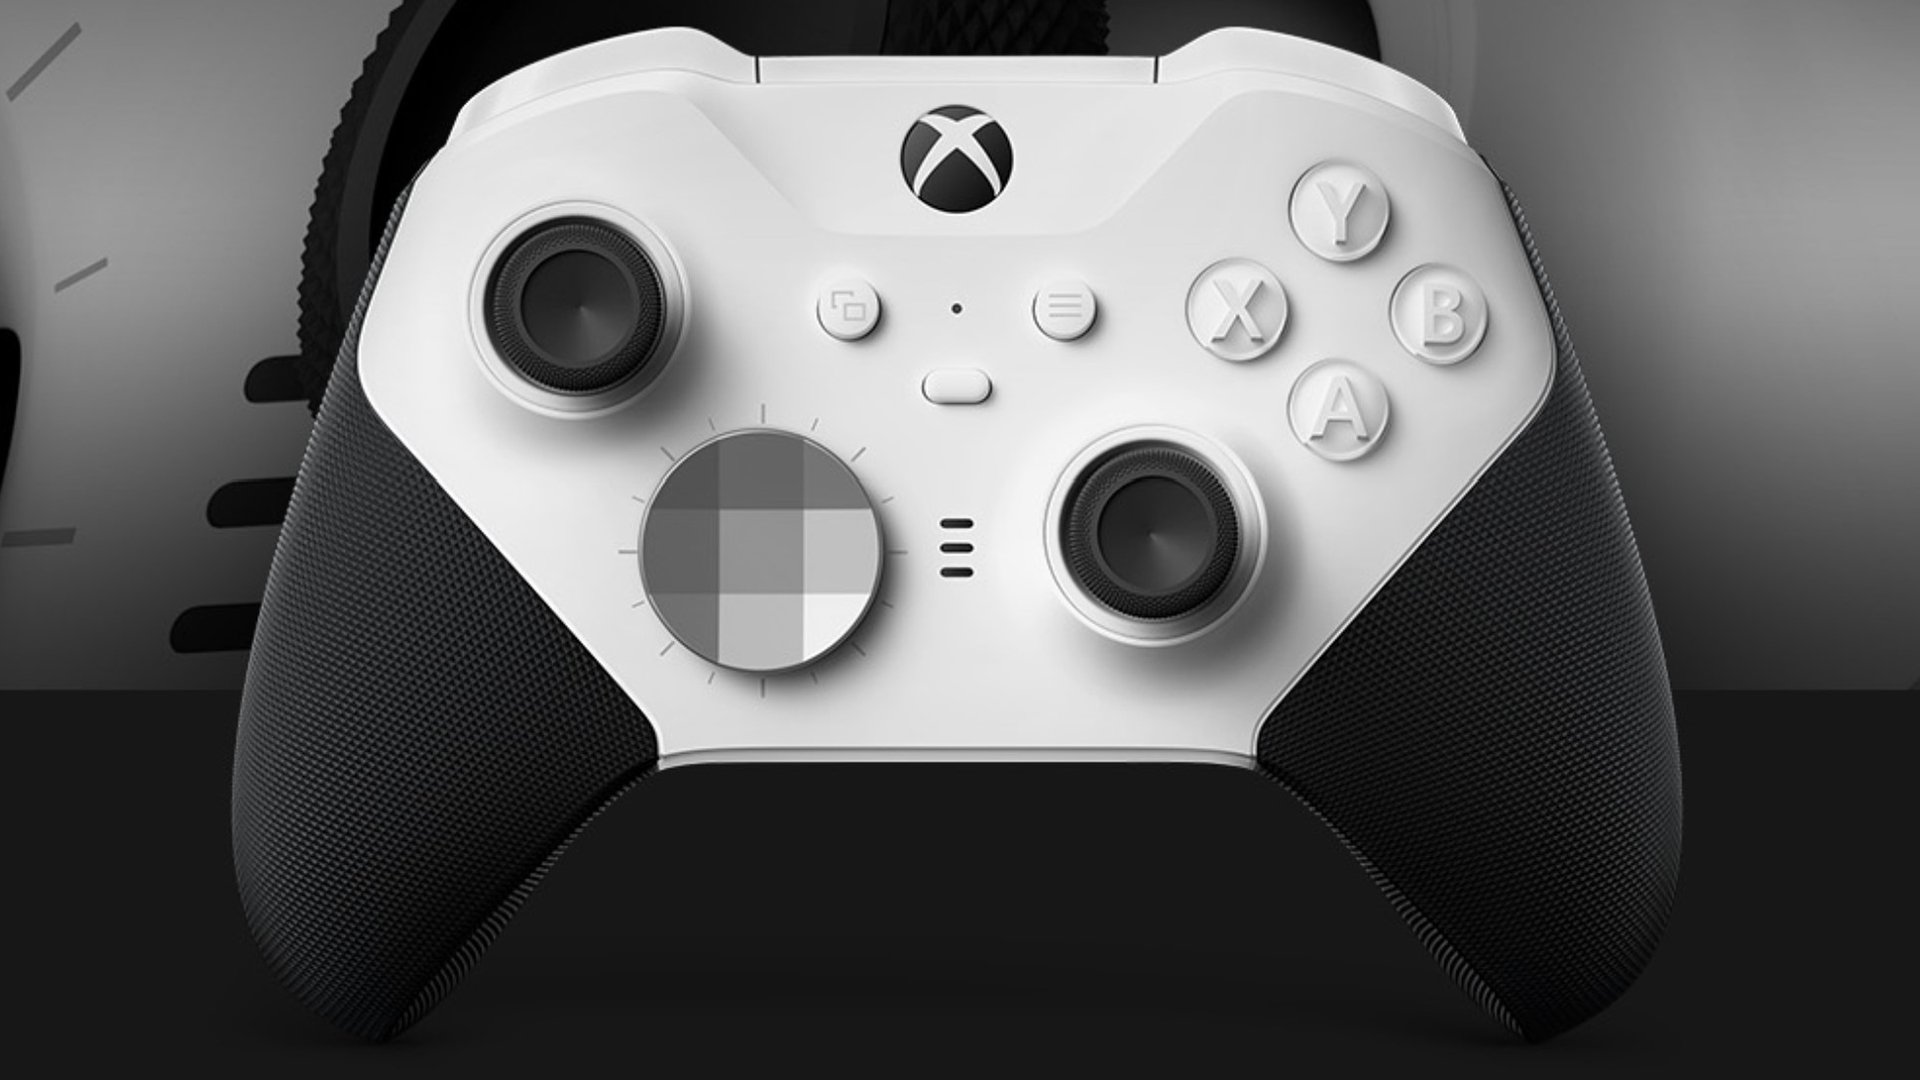 The white Xbox Elite Series 2 controller is official, and $50 cheaper than  the black version